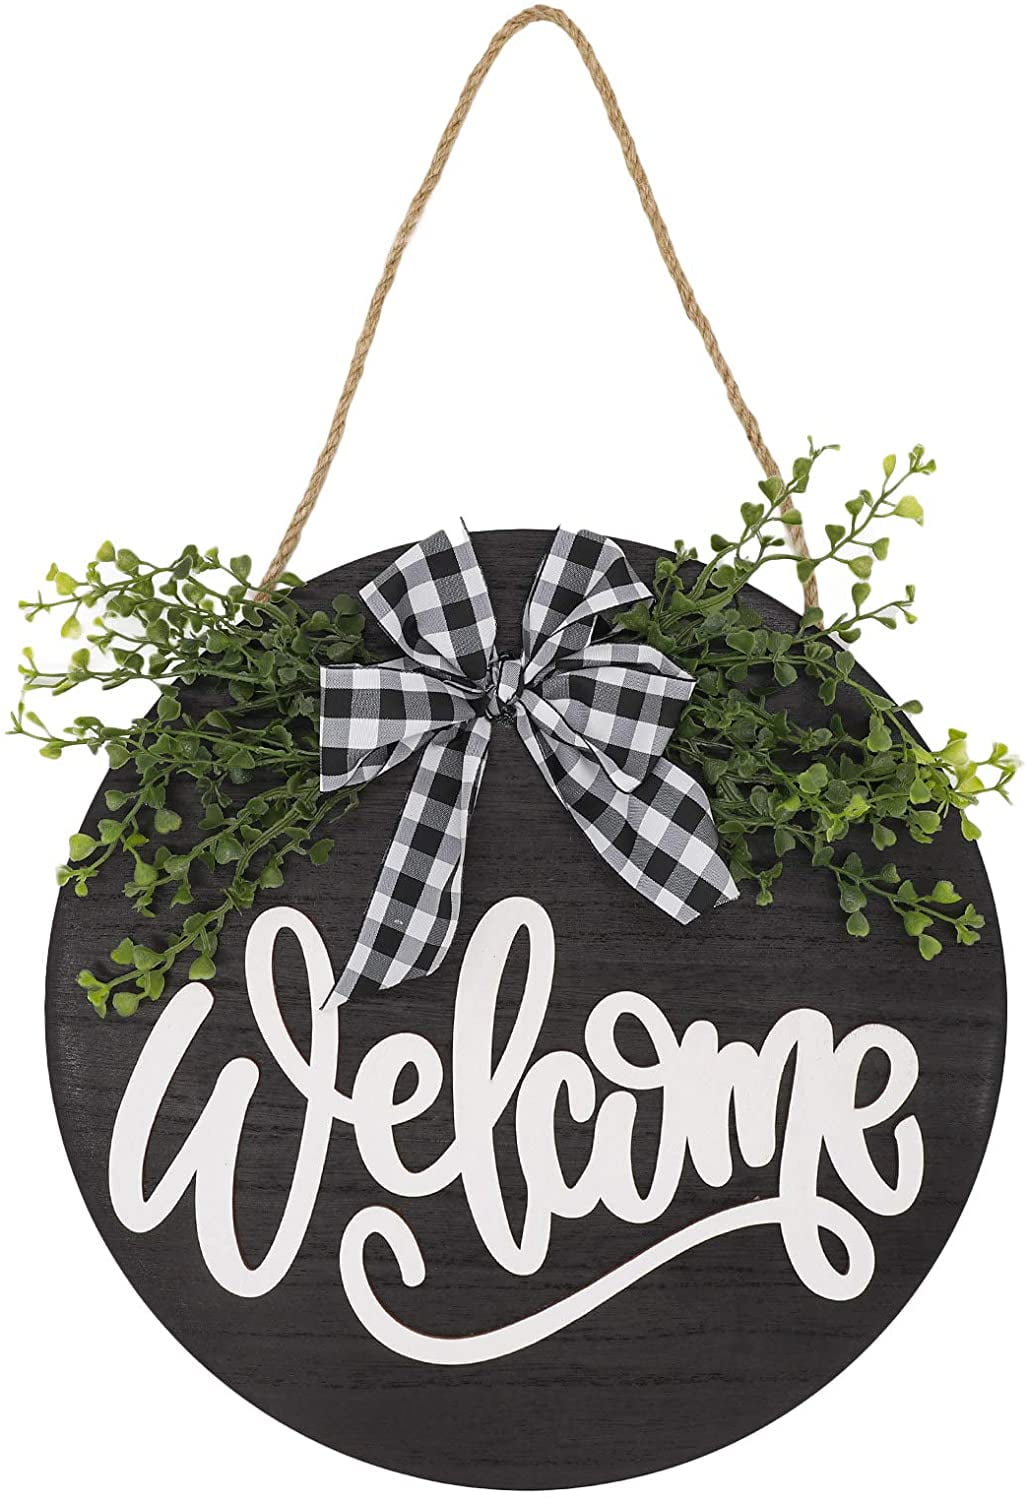 Christmas Wooden Circle Sign Blank Welcome Sign Wood Front Door Decor Unfinished Round Wood Hanging Sign with Twine and Ribbons for DIY Crafts Christmas Decor 3 Pieces Black-3pcs 